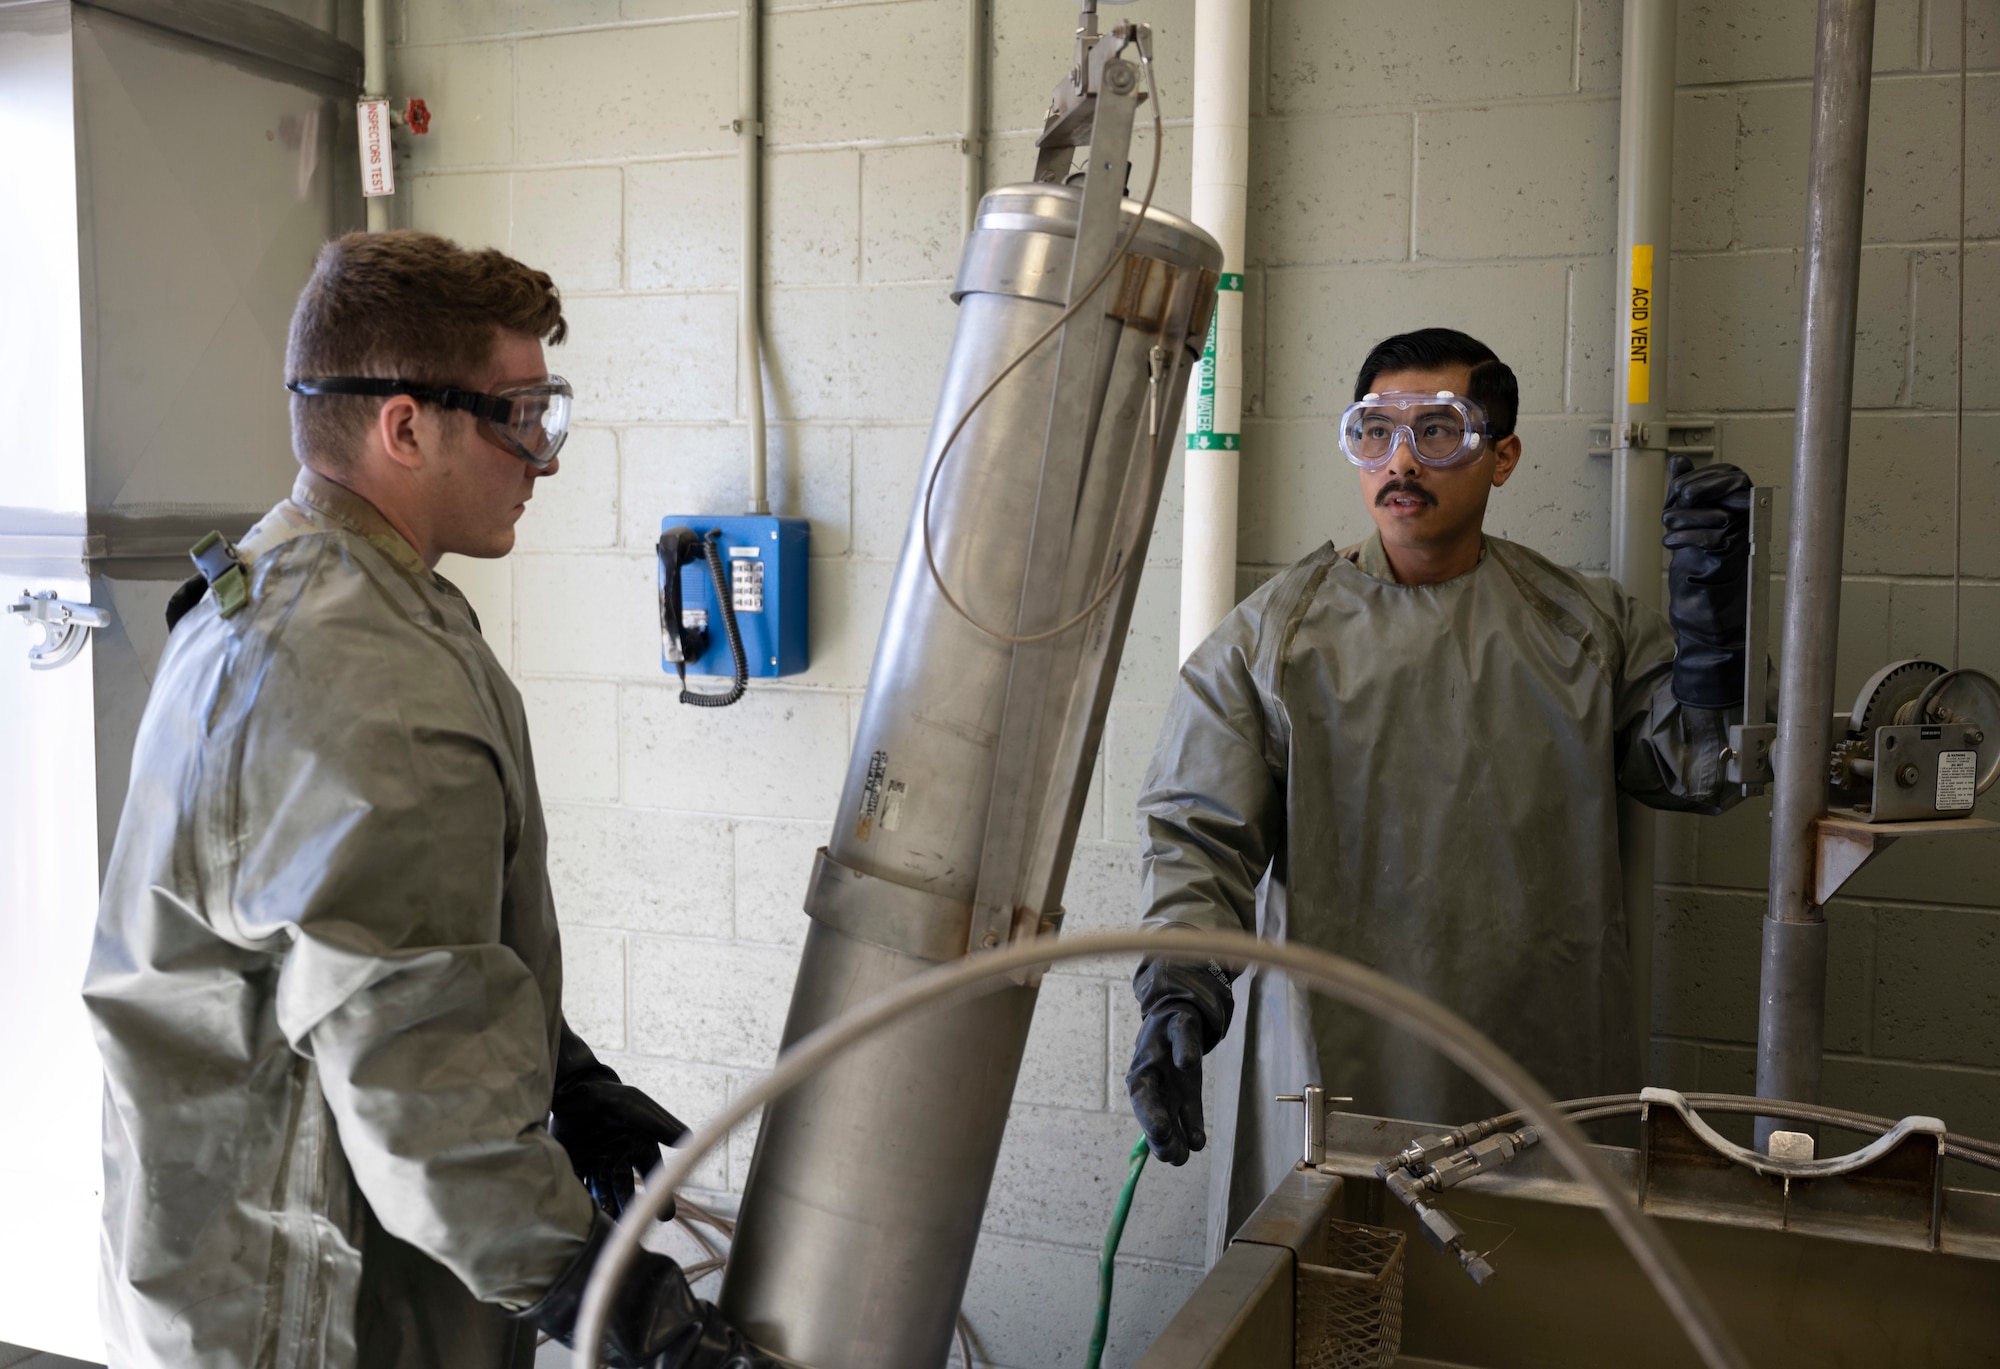 U.S. Air Force Airman 1st Class Cameron Kelley, 49th Component Maintenance Squadron aircraft fuel systems journeyman, left, and U.S. Air Force Staff Sgt. Brandon Millare, 49th CMS aircraft fuel systems craftsman, transport a container of hydrazine at Holloman Air Force Base, New Mexico, April 18, 2023. Hydrazine is a highly toxic and flammable compound that requires strict handling procedures and specialized equipment to prevent accidents and leaks. (U.S. Air Force photo by Airman 1st Class Michelle Ferrari)